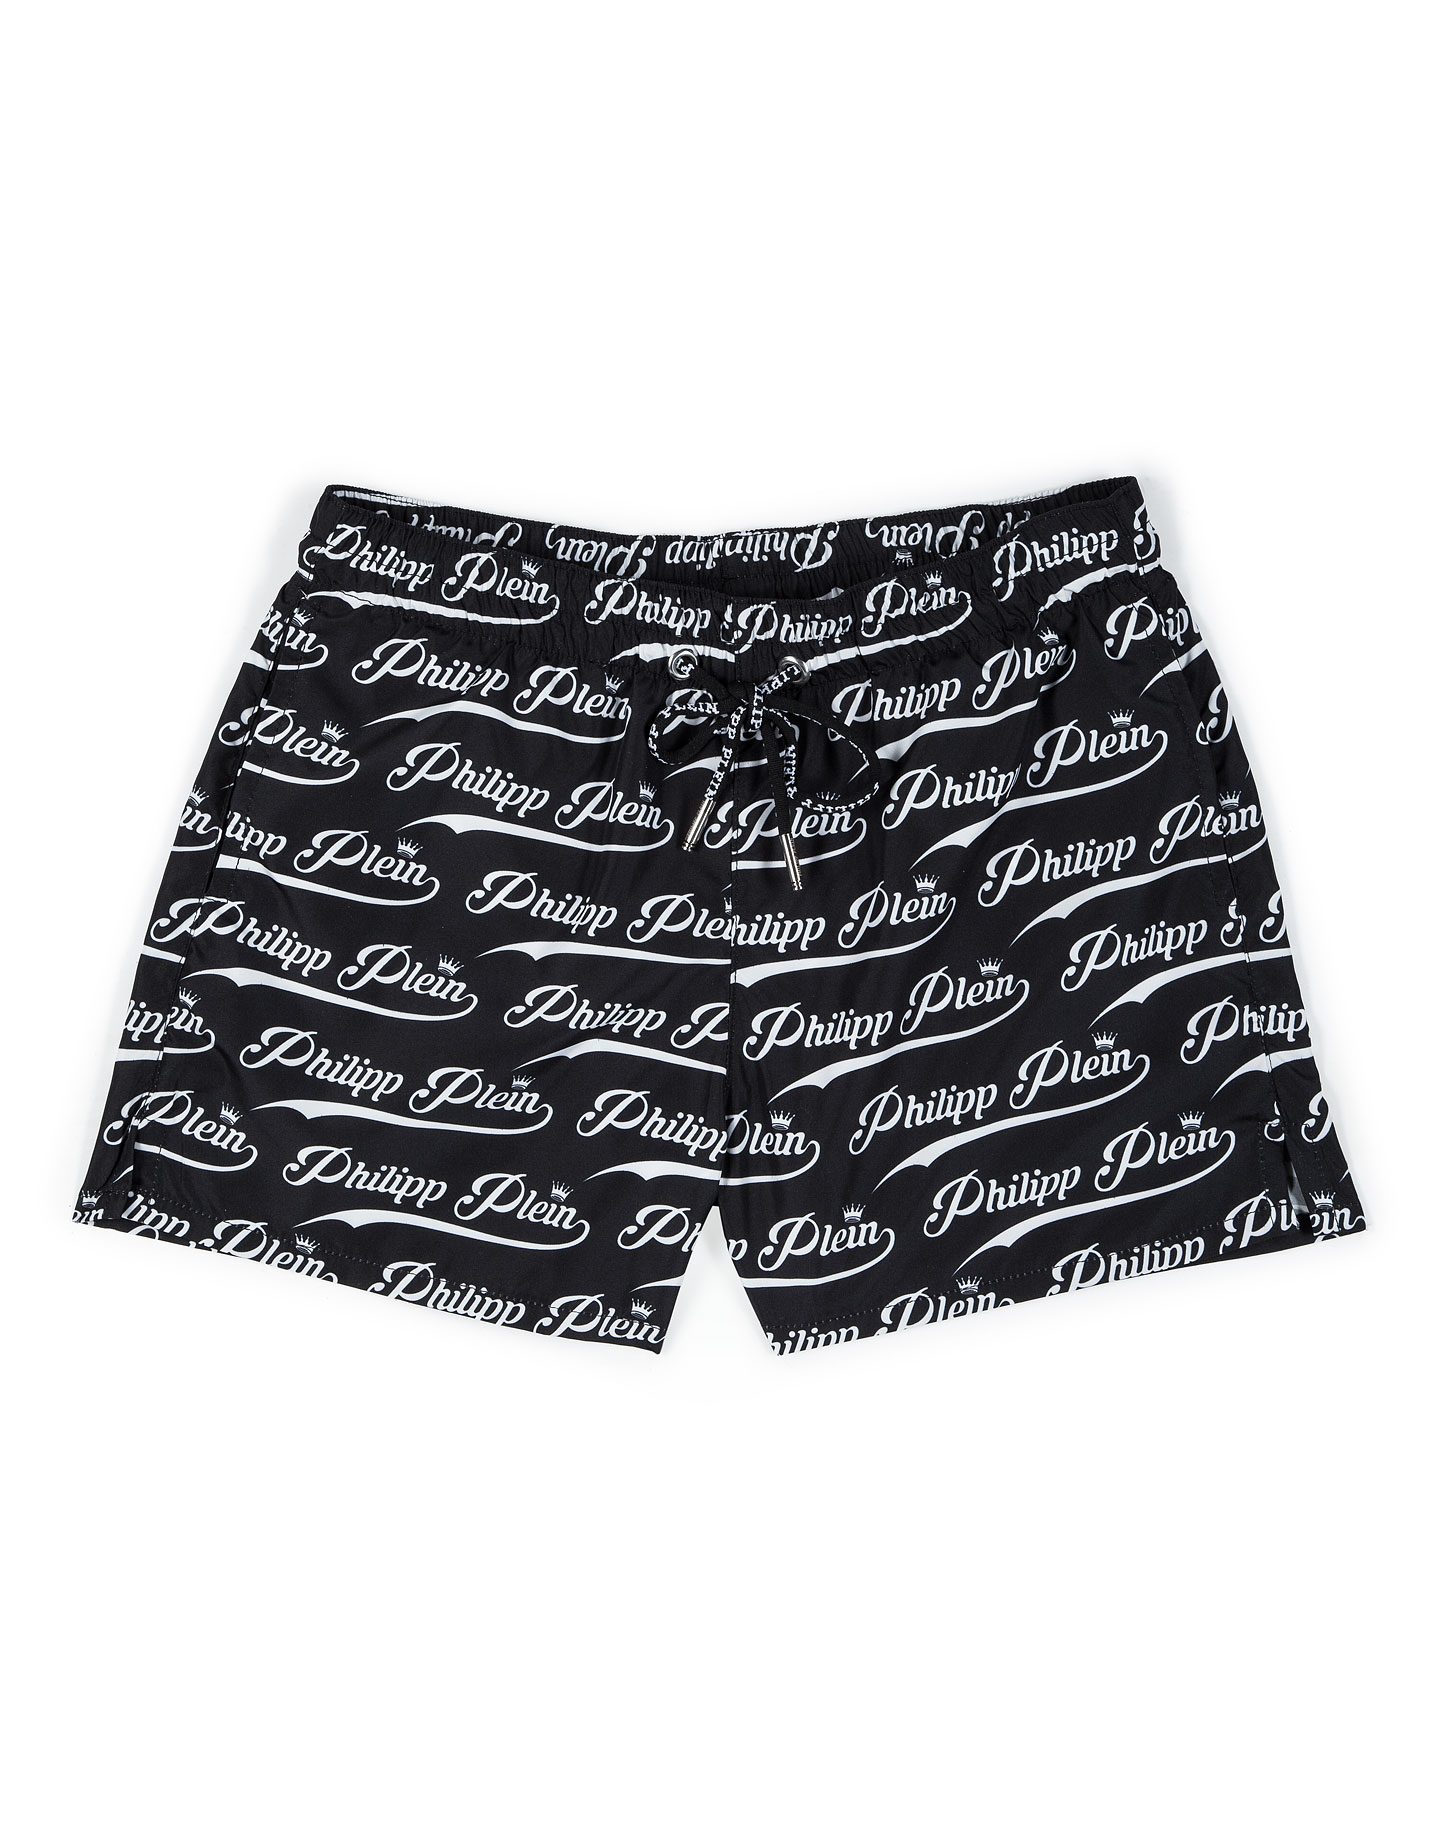 Farm Animal Print Summer Graphic Shorts Men For Gym, Running, Surfing, Beach,  Swimming Fast Dry, Casual, Plus Size From Daqiaoli, $14.99 | DHgate.Com